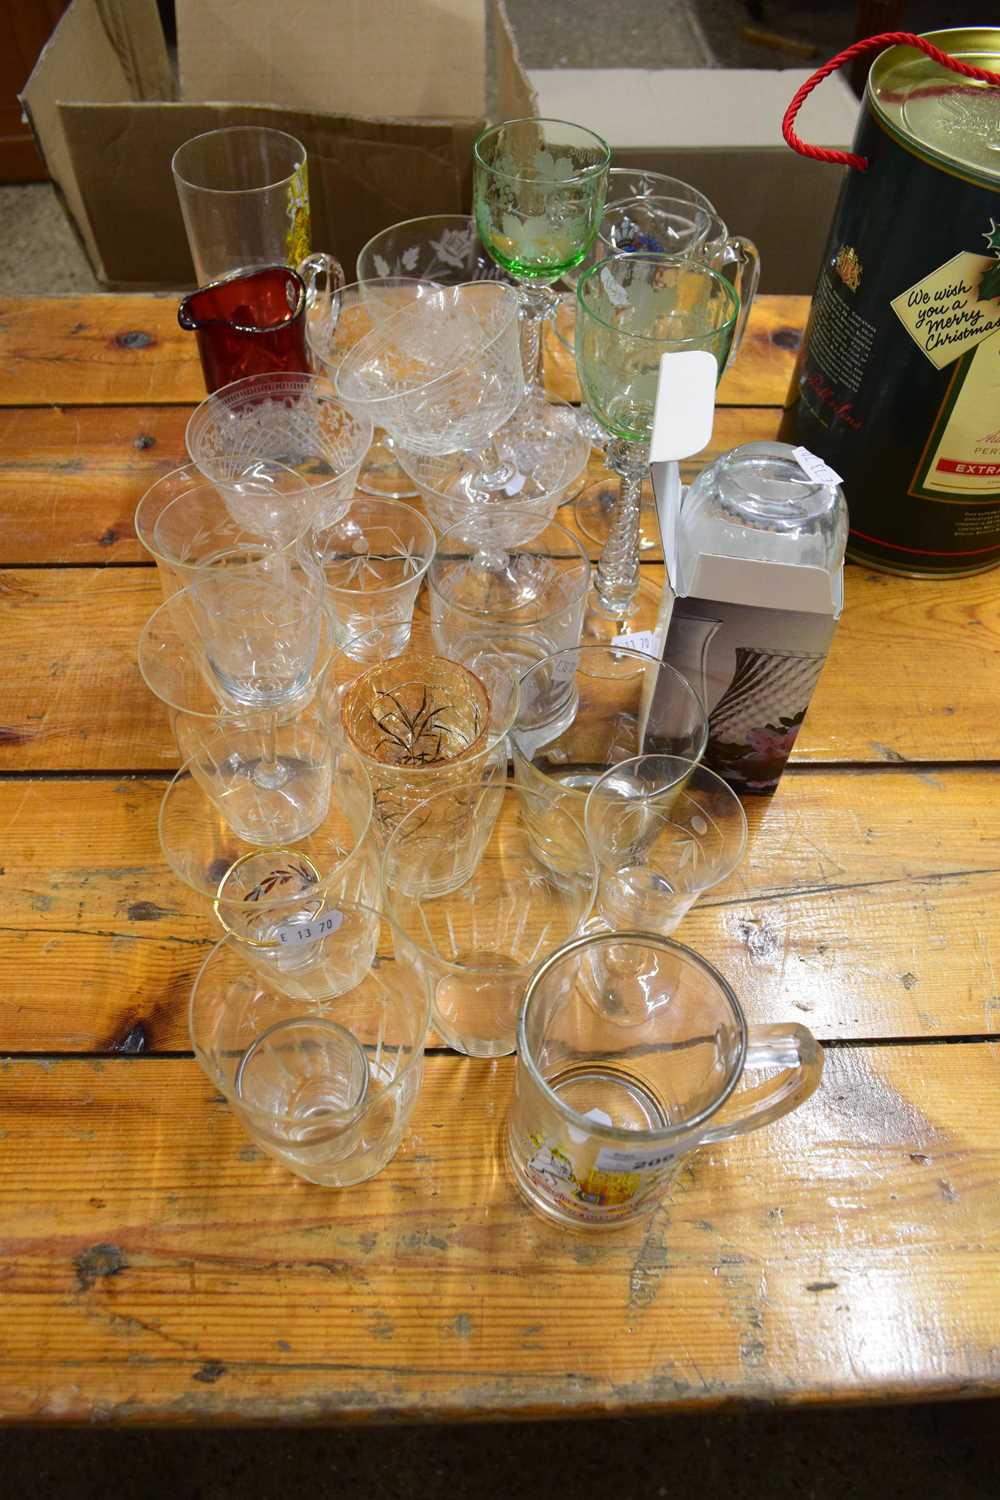 QUANTITY OF GLASS WARES, TUMBLERS AND DRINKING GLASSES